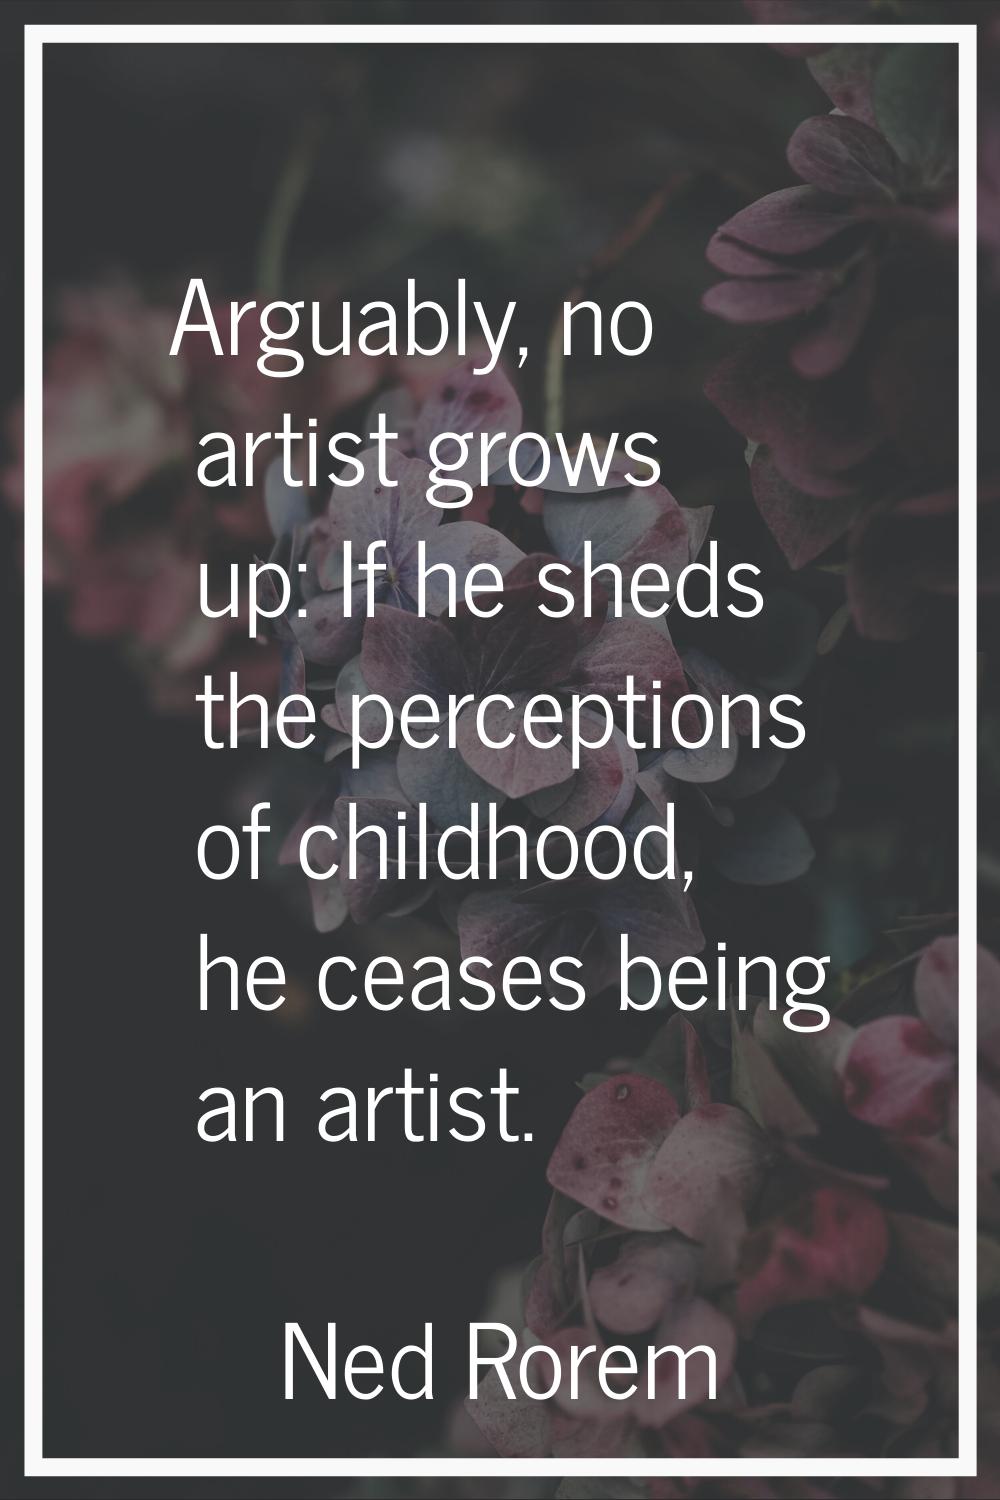 Arguably, no artist grows up: If he sheds the perceptions of childhood, he ceases being an artist.